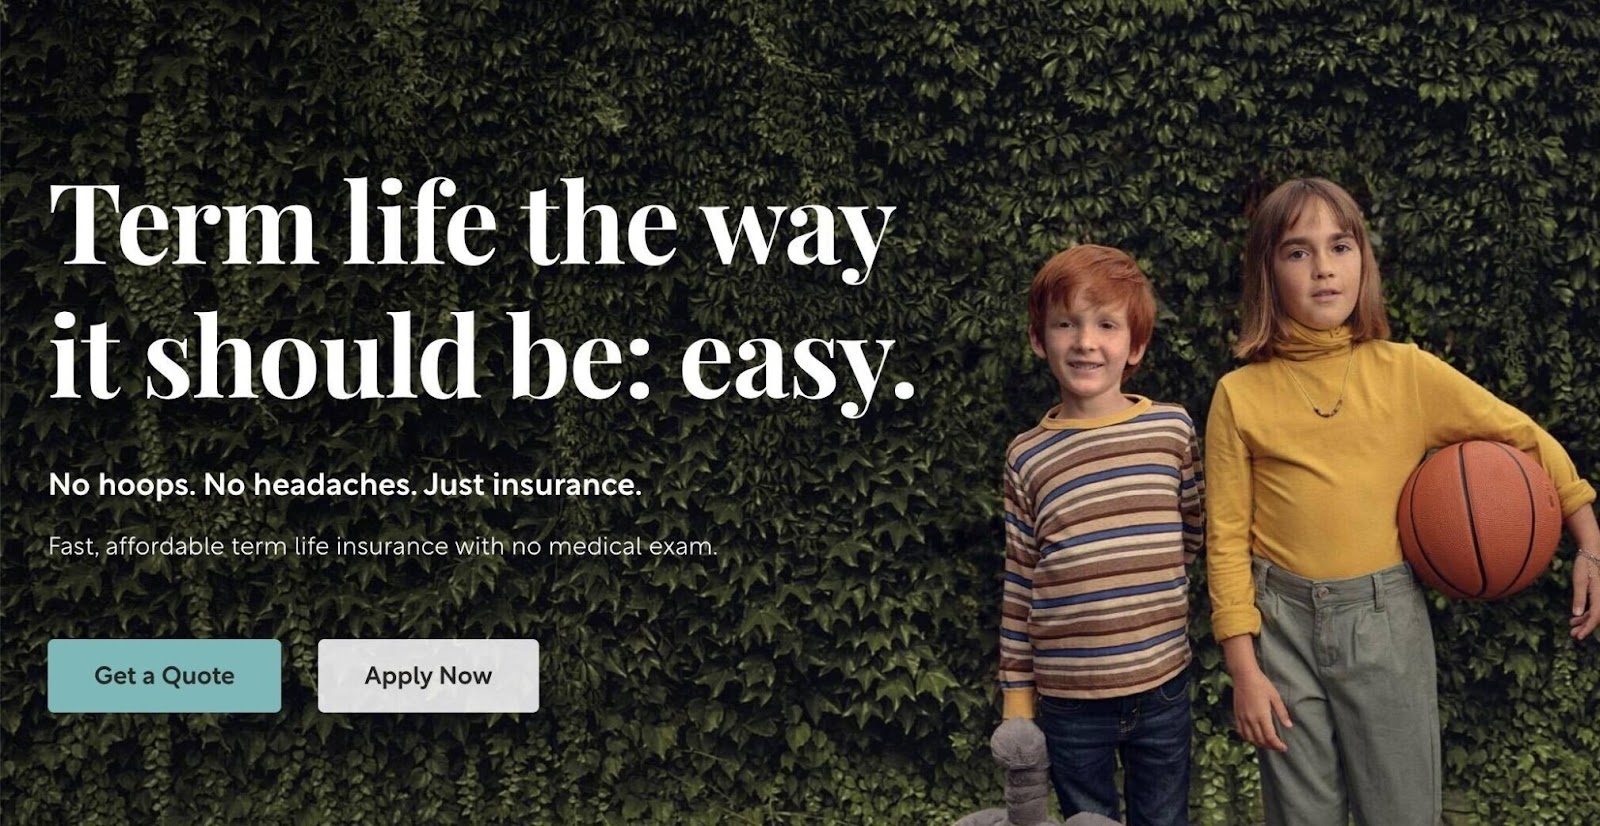 Bestow's landing page that says "Term life the way it should be: easy."